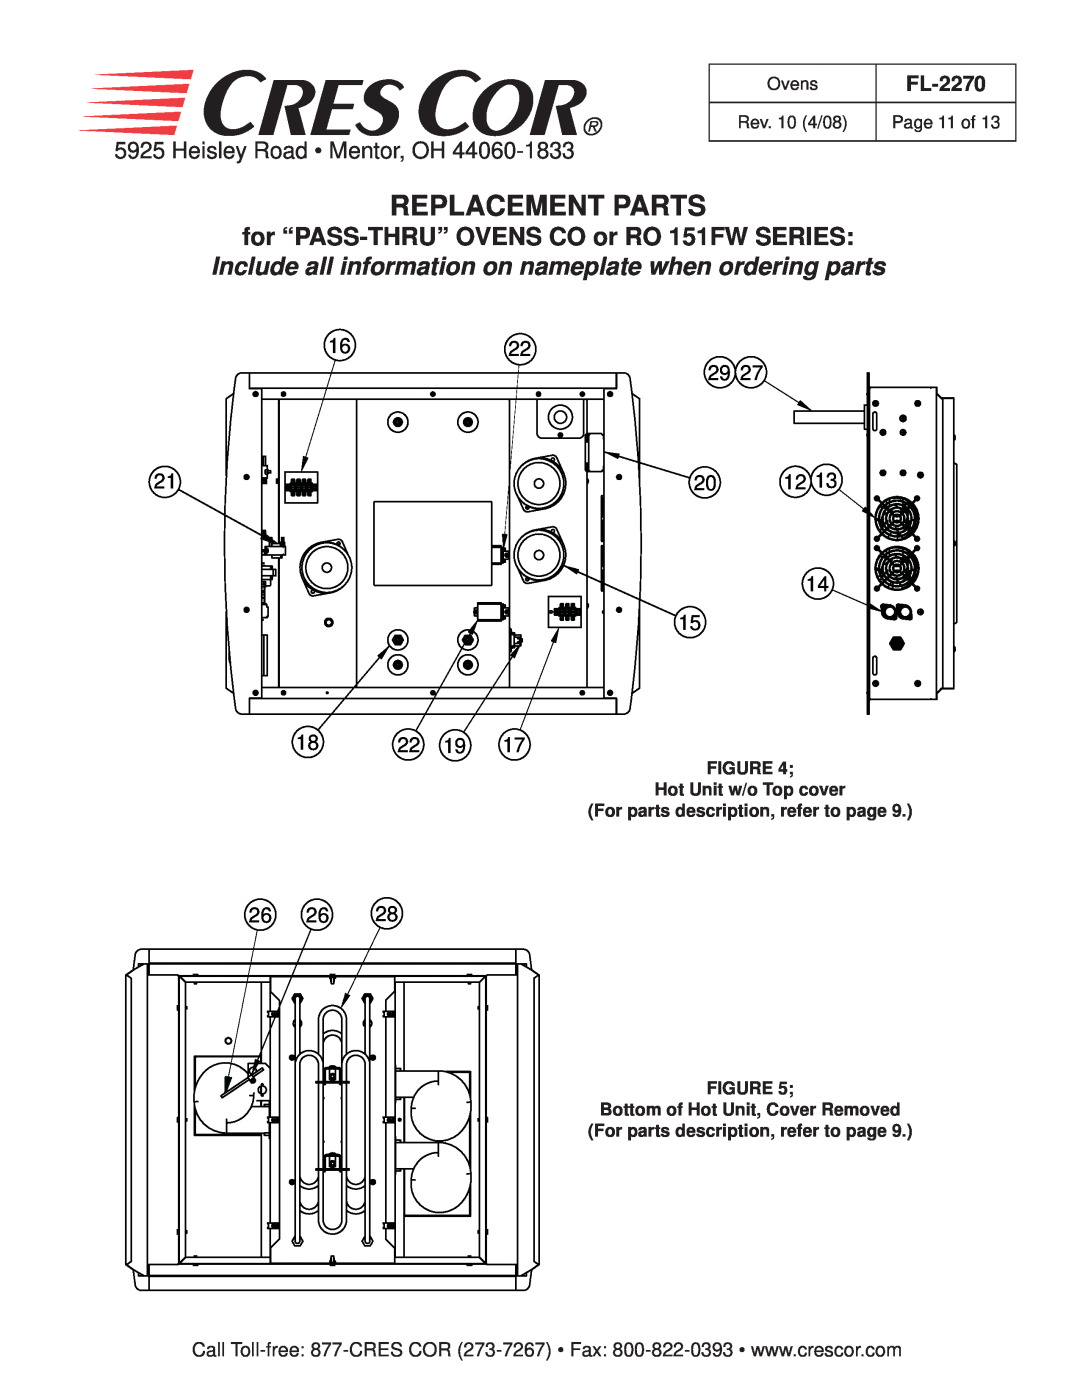 Cres Cor CO151HW189B for “PASS-THRU”OVENS CO or RO 151FW SERIES, Replacement Parts, Heisley Road Mentor, OH, FL-2270, 1622 